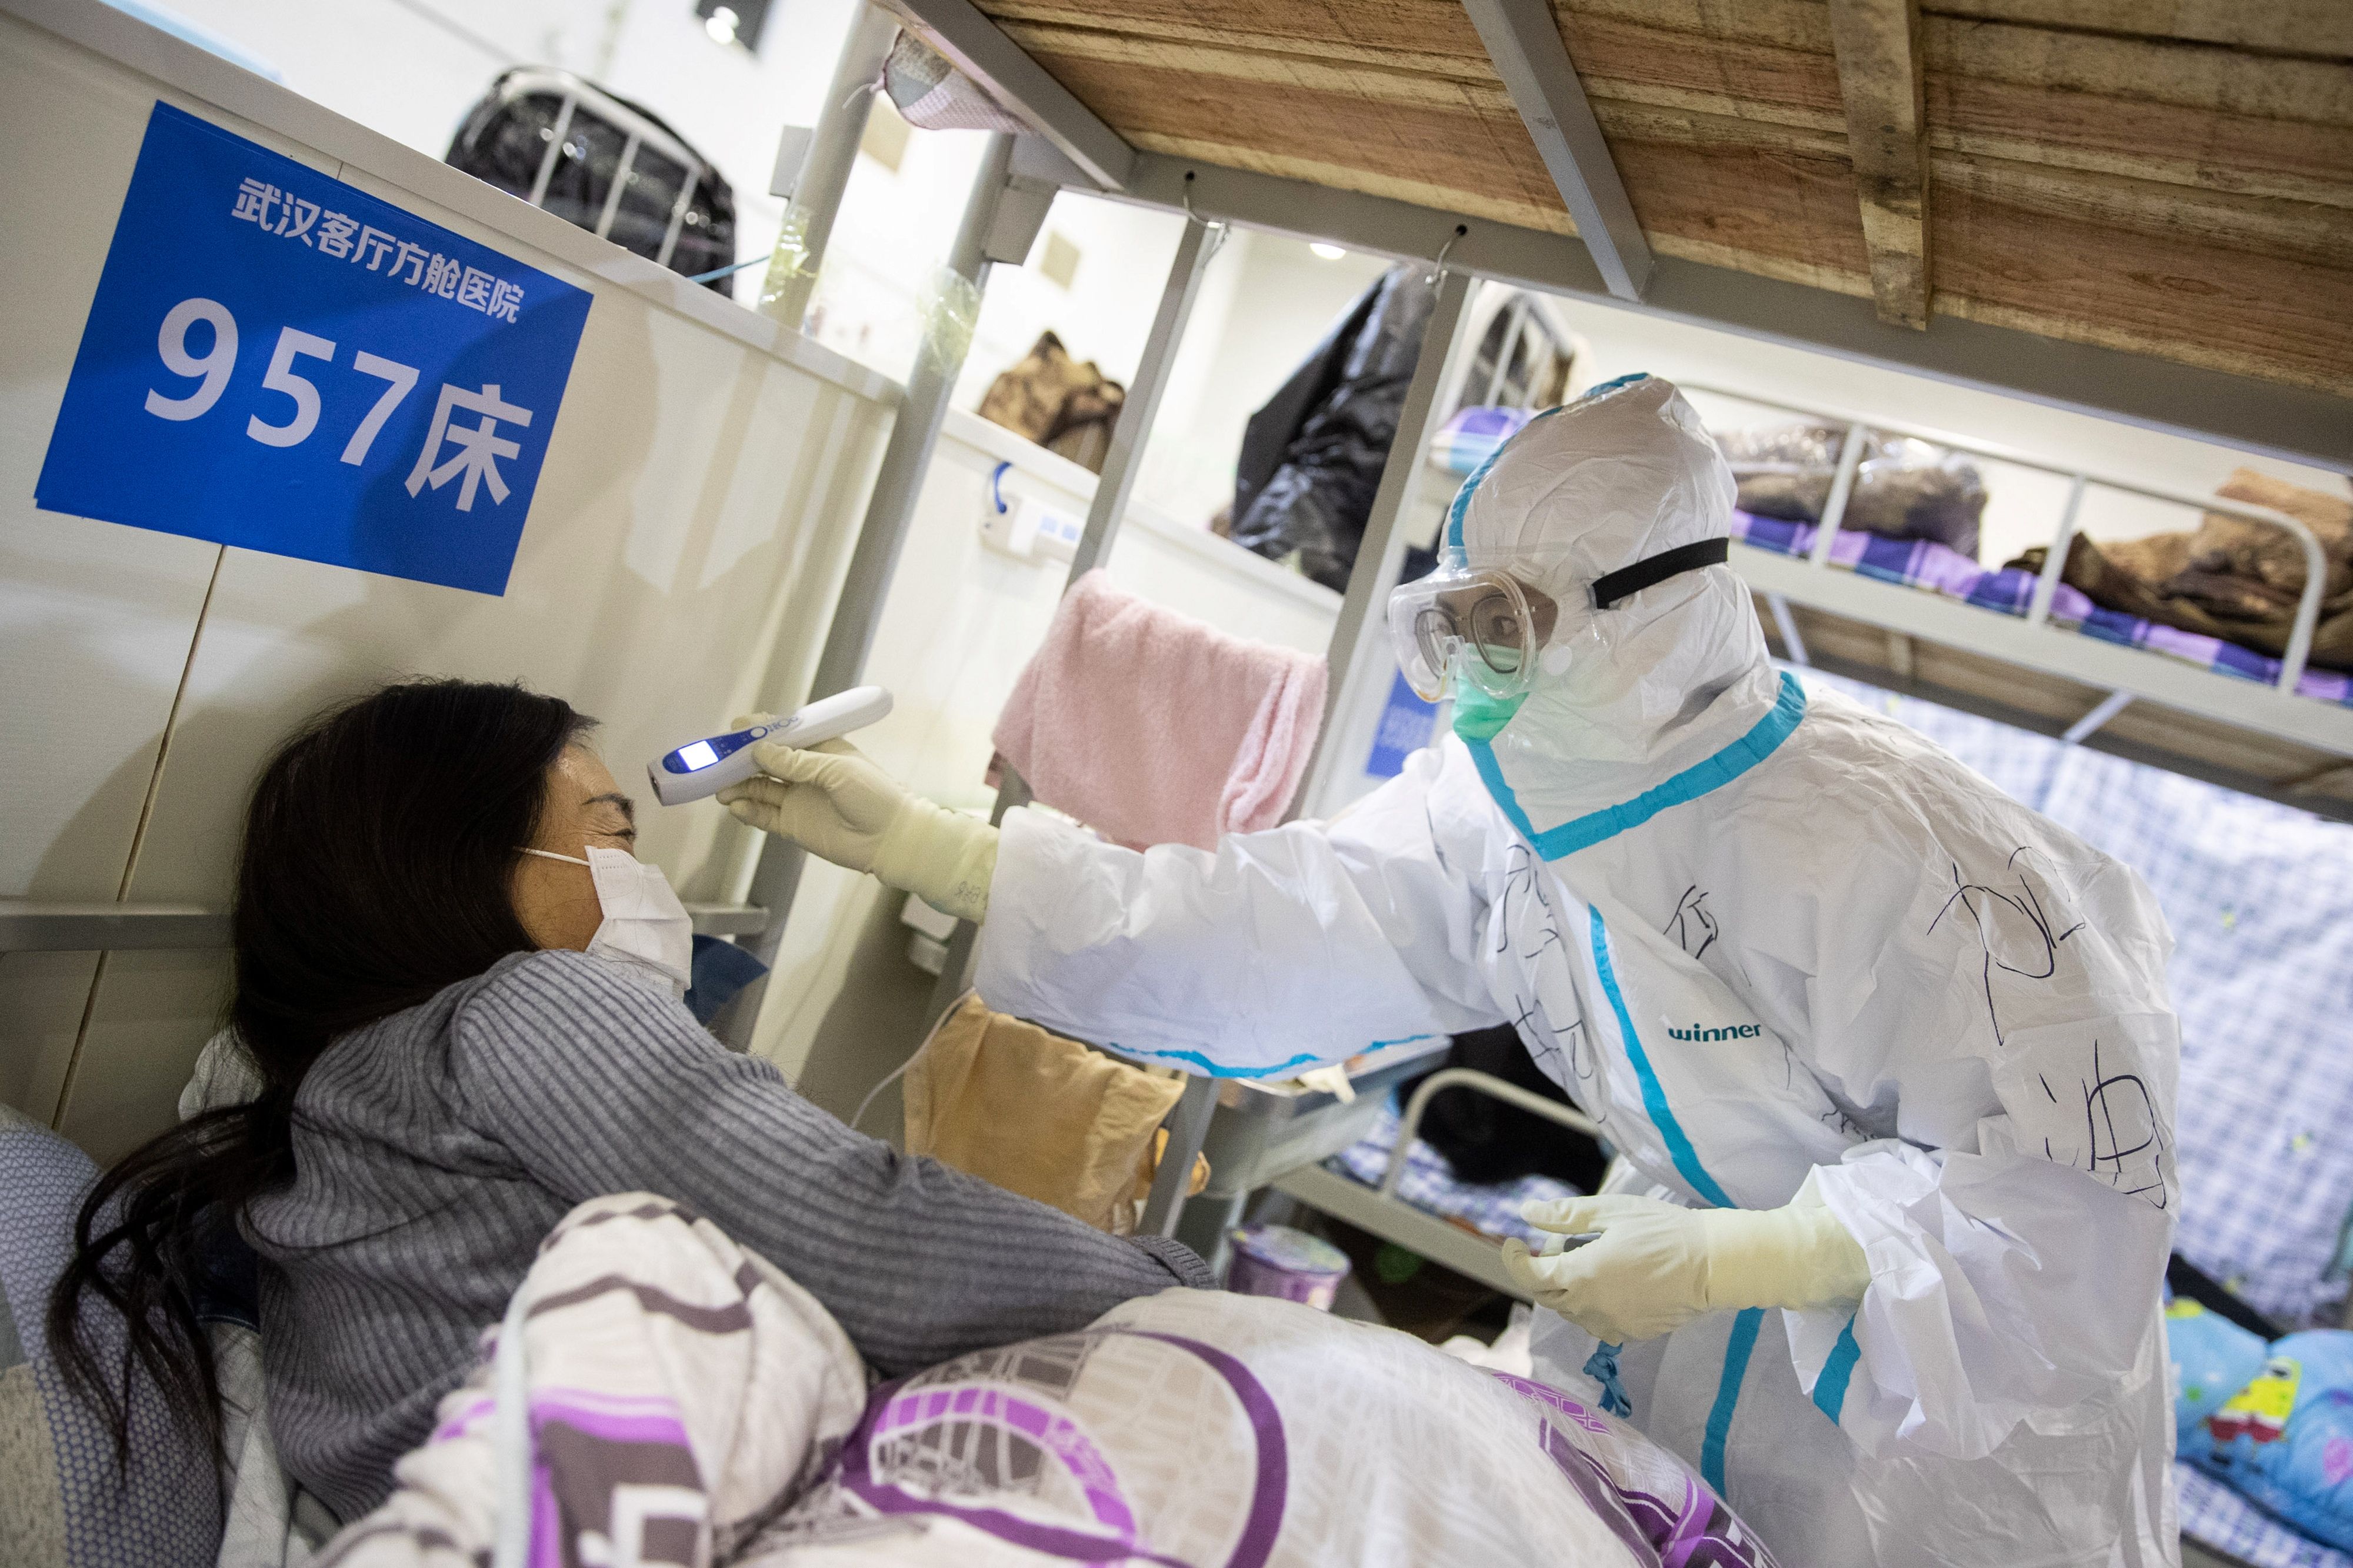 A medic working inside a makeshift hospital in Wuhan checks the temperature of a patient who has displayed mild symptoms consistent with coronavirus.